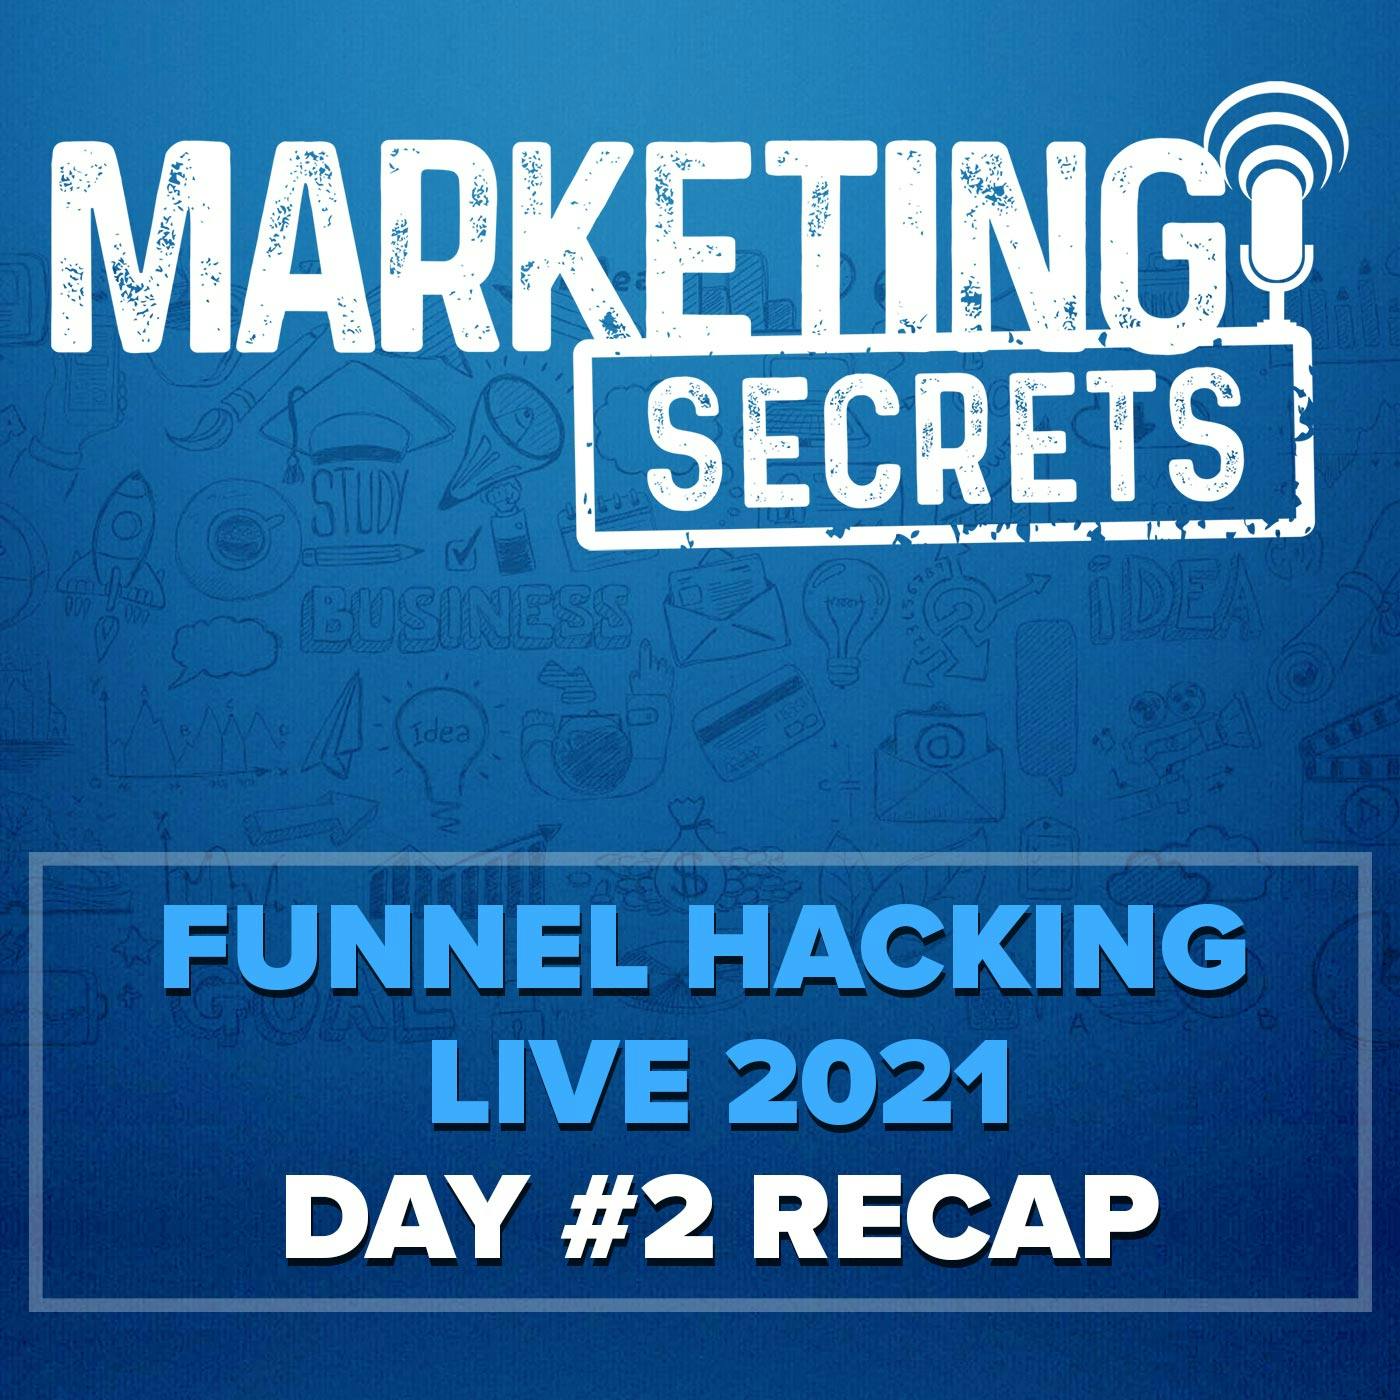 Funnel Hacking Live 2021 - Day #2 Recap